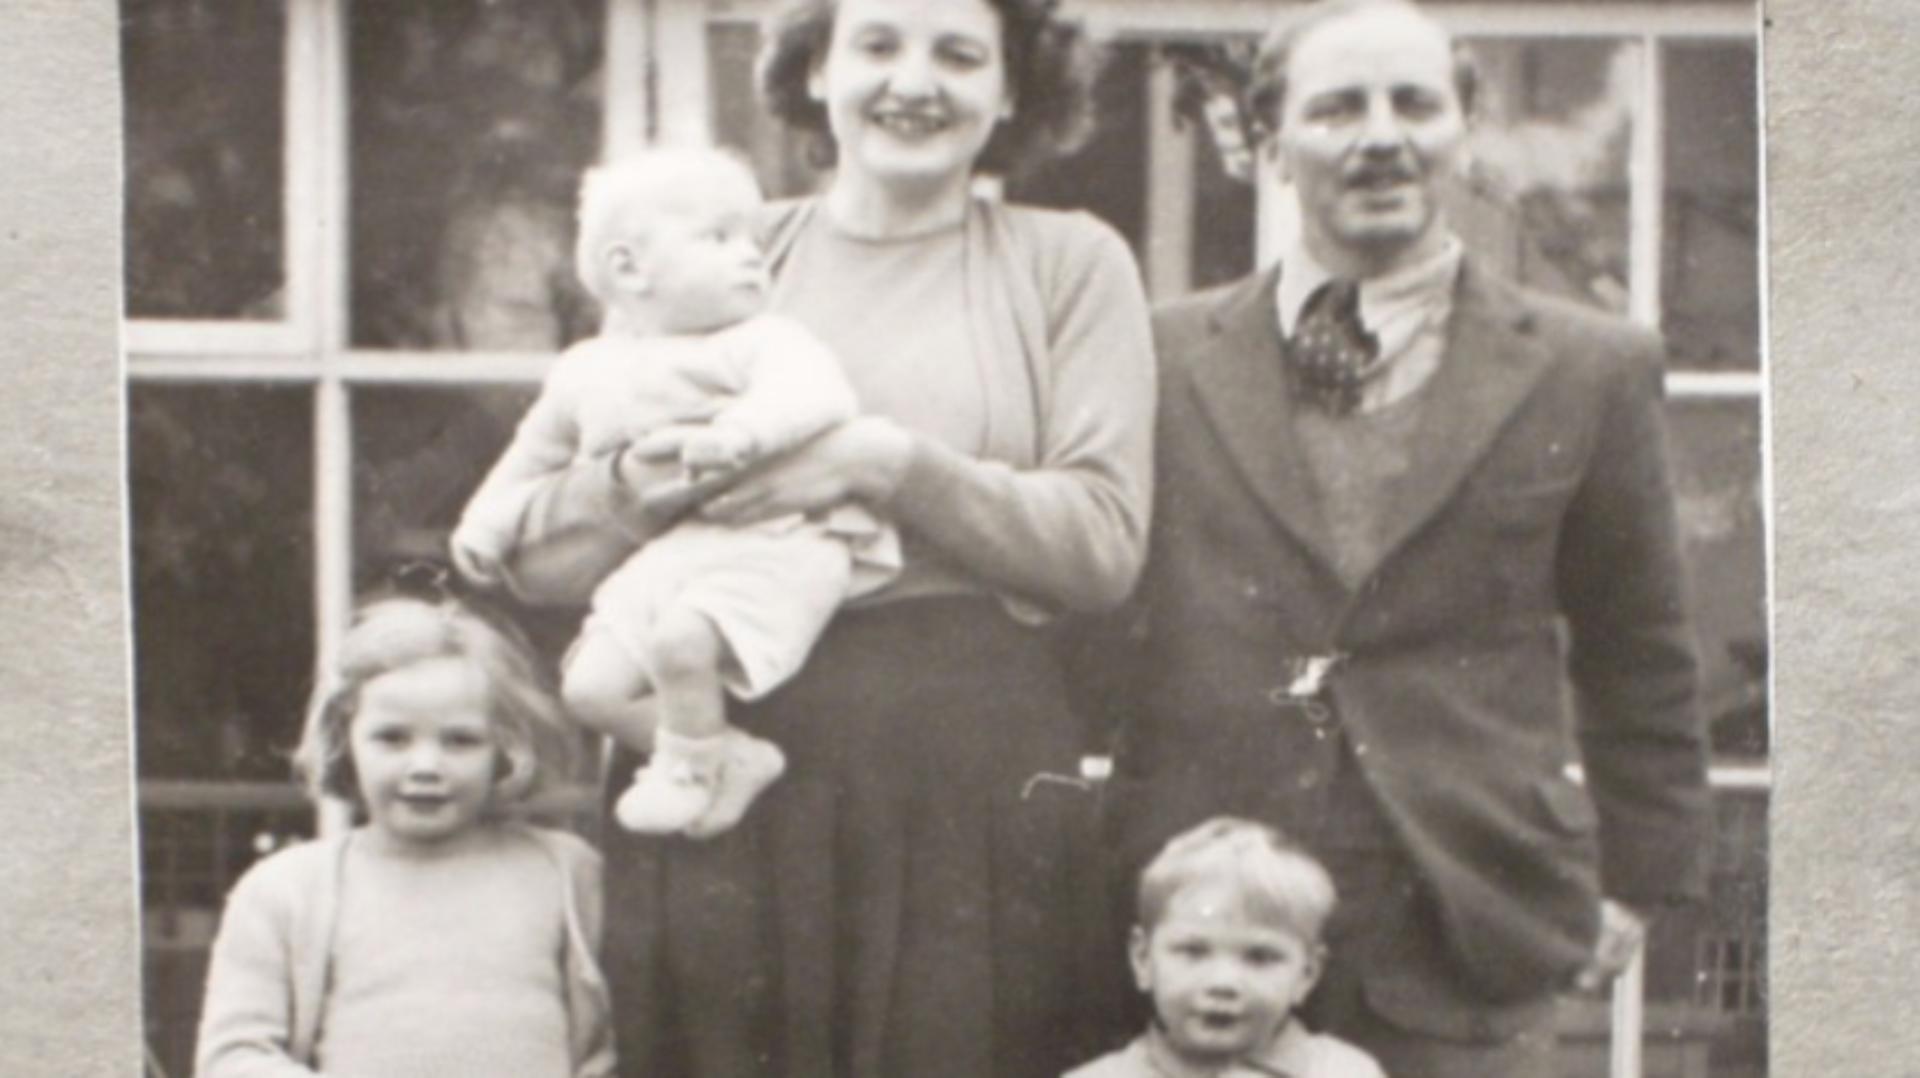 James Dyson as a baby with his parents and two siblings